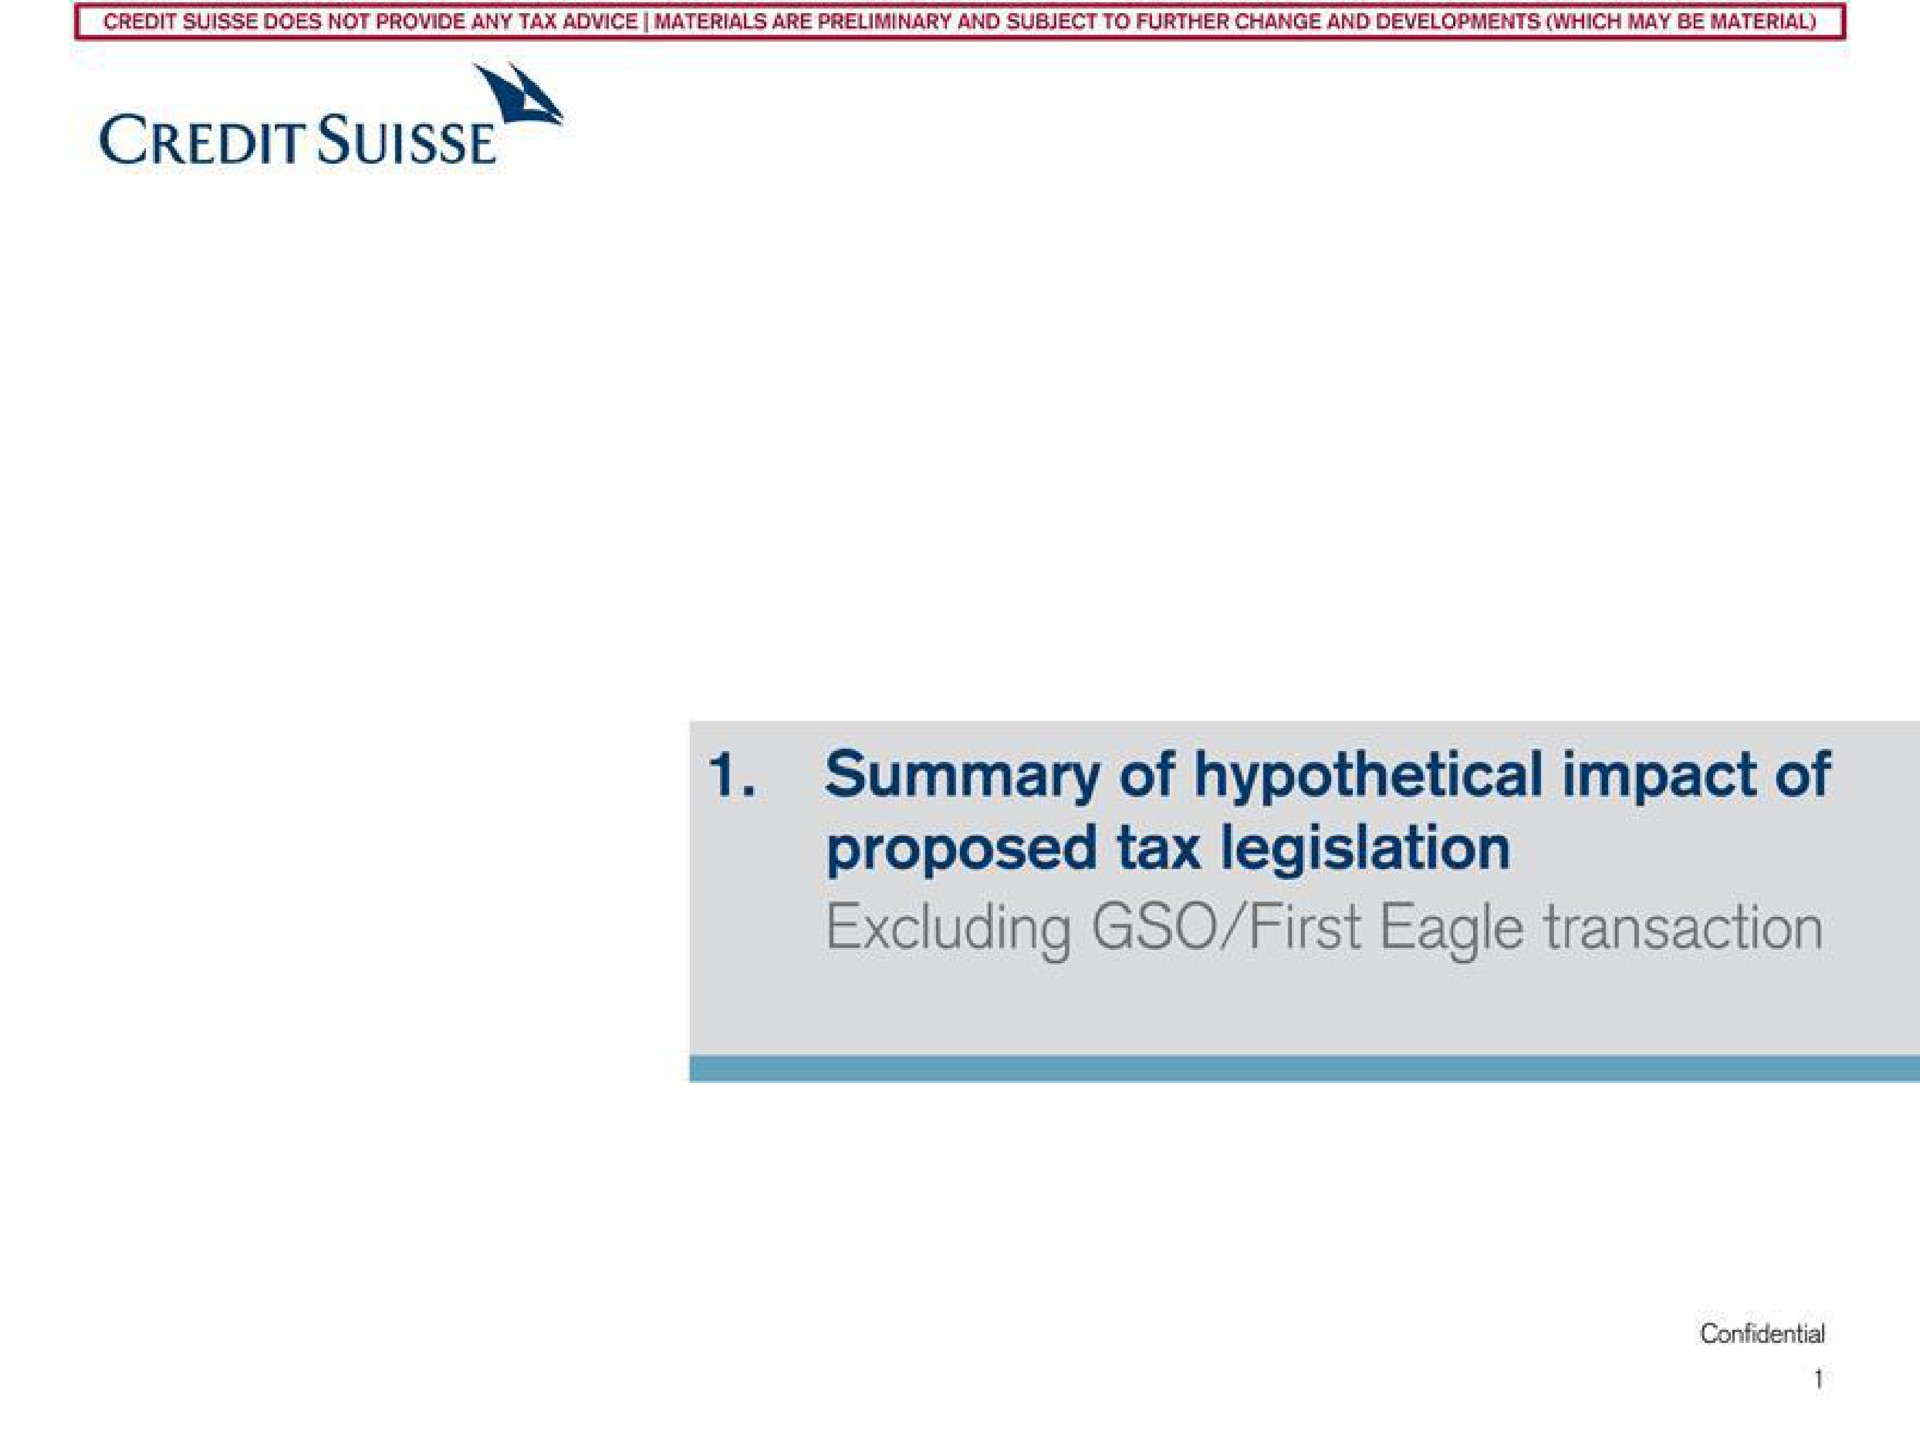 credit summary of hypothetical impact of proposed tax legislation excluding first eagle transaction | Credit Suisse